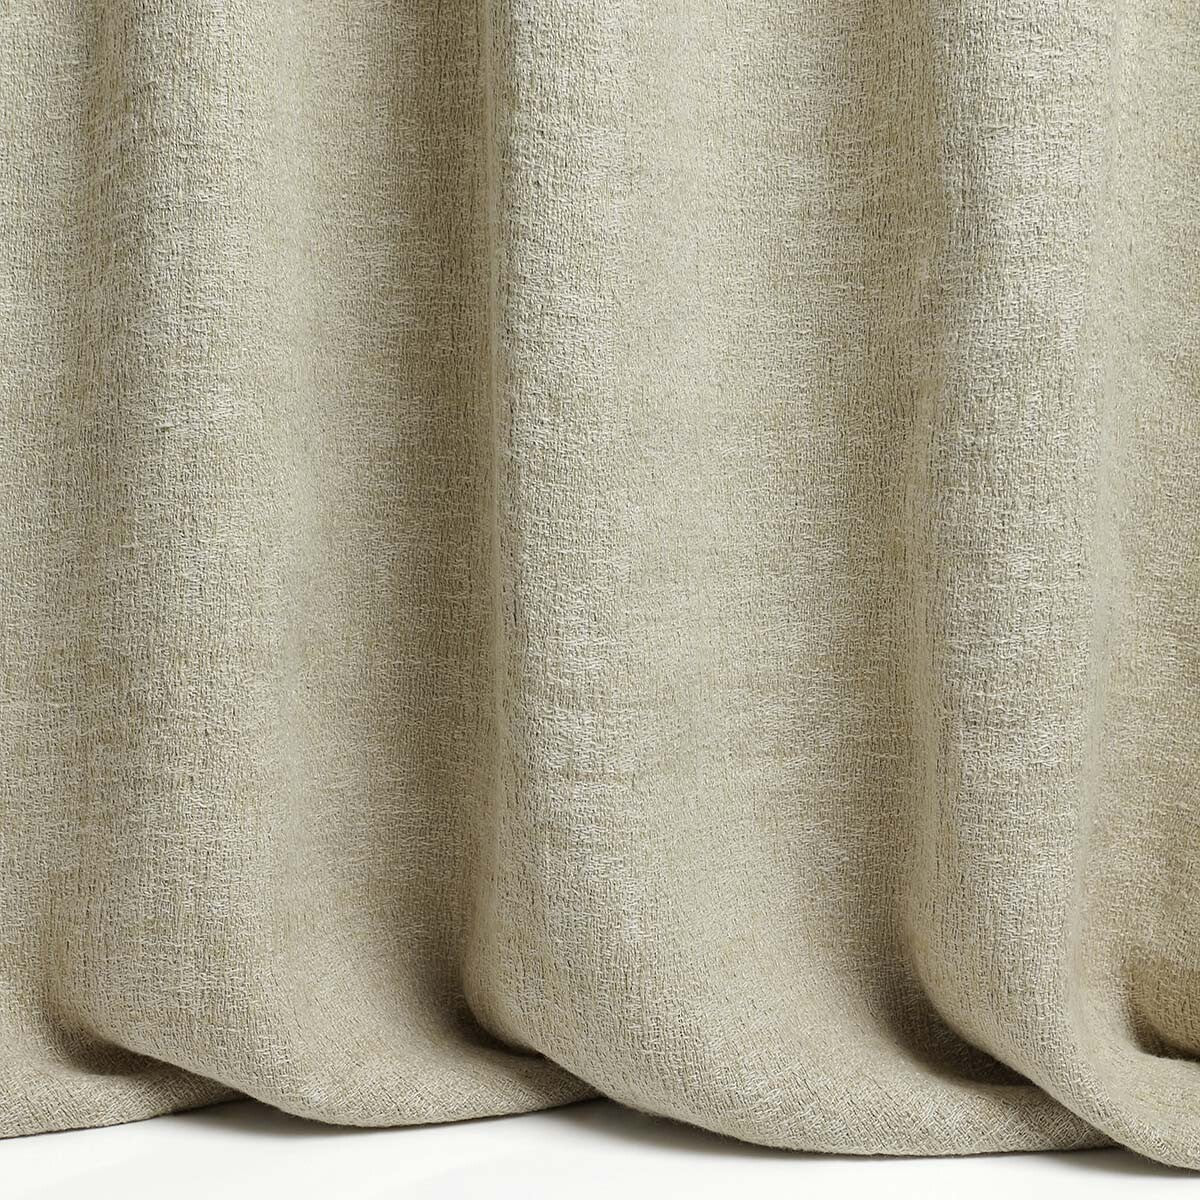 Vivace fabric in 16 color - pattern LZ-30409.16.0 - by Kravet Couture in the Lizzo collection